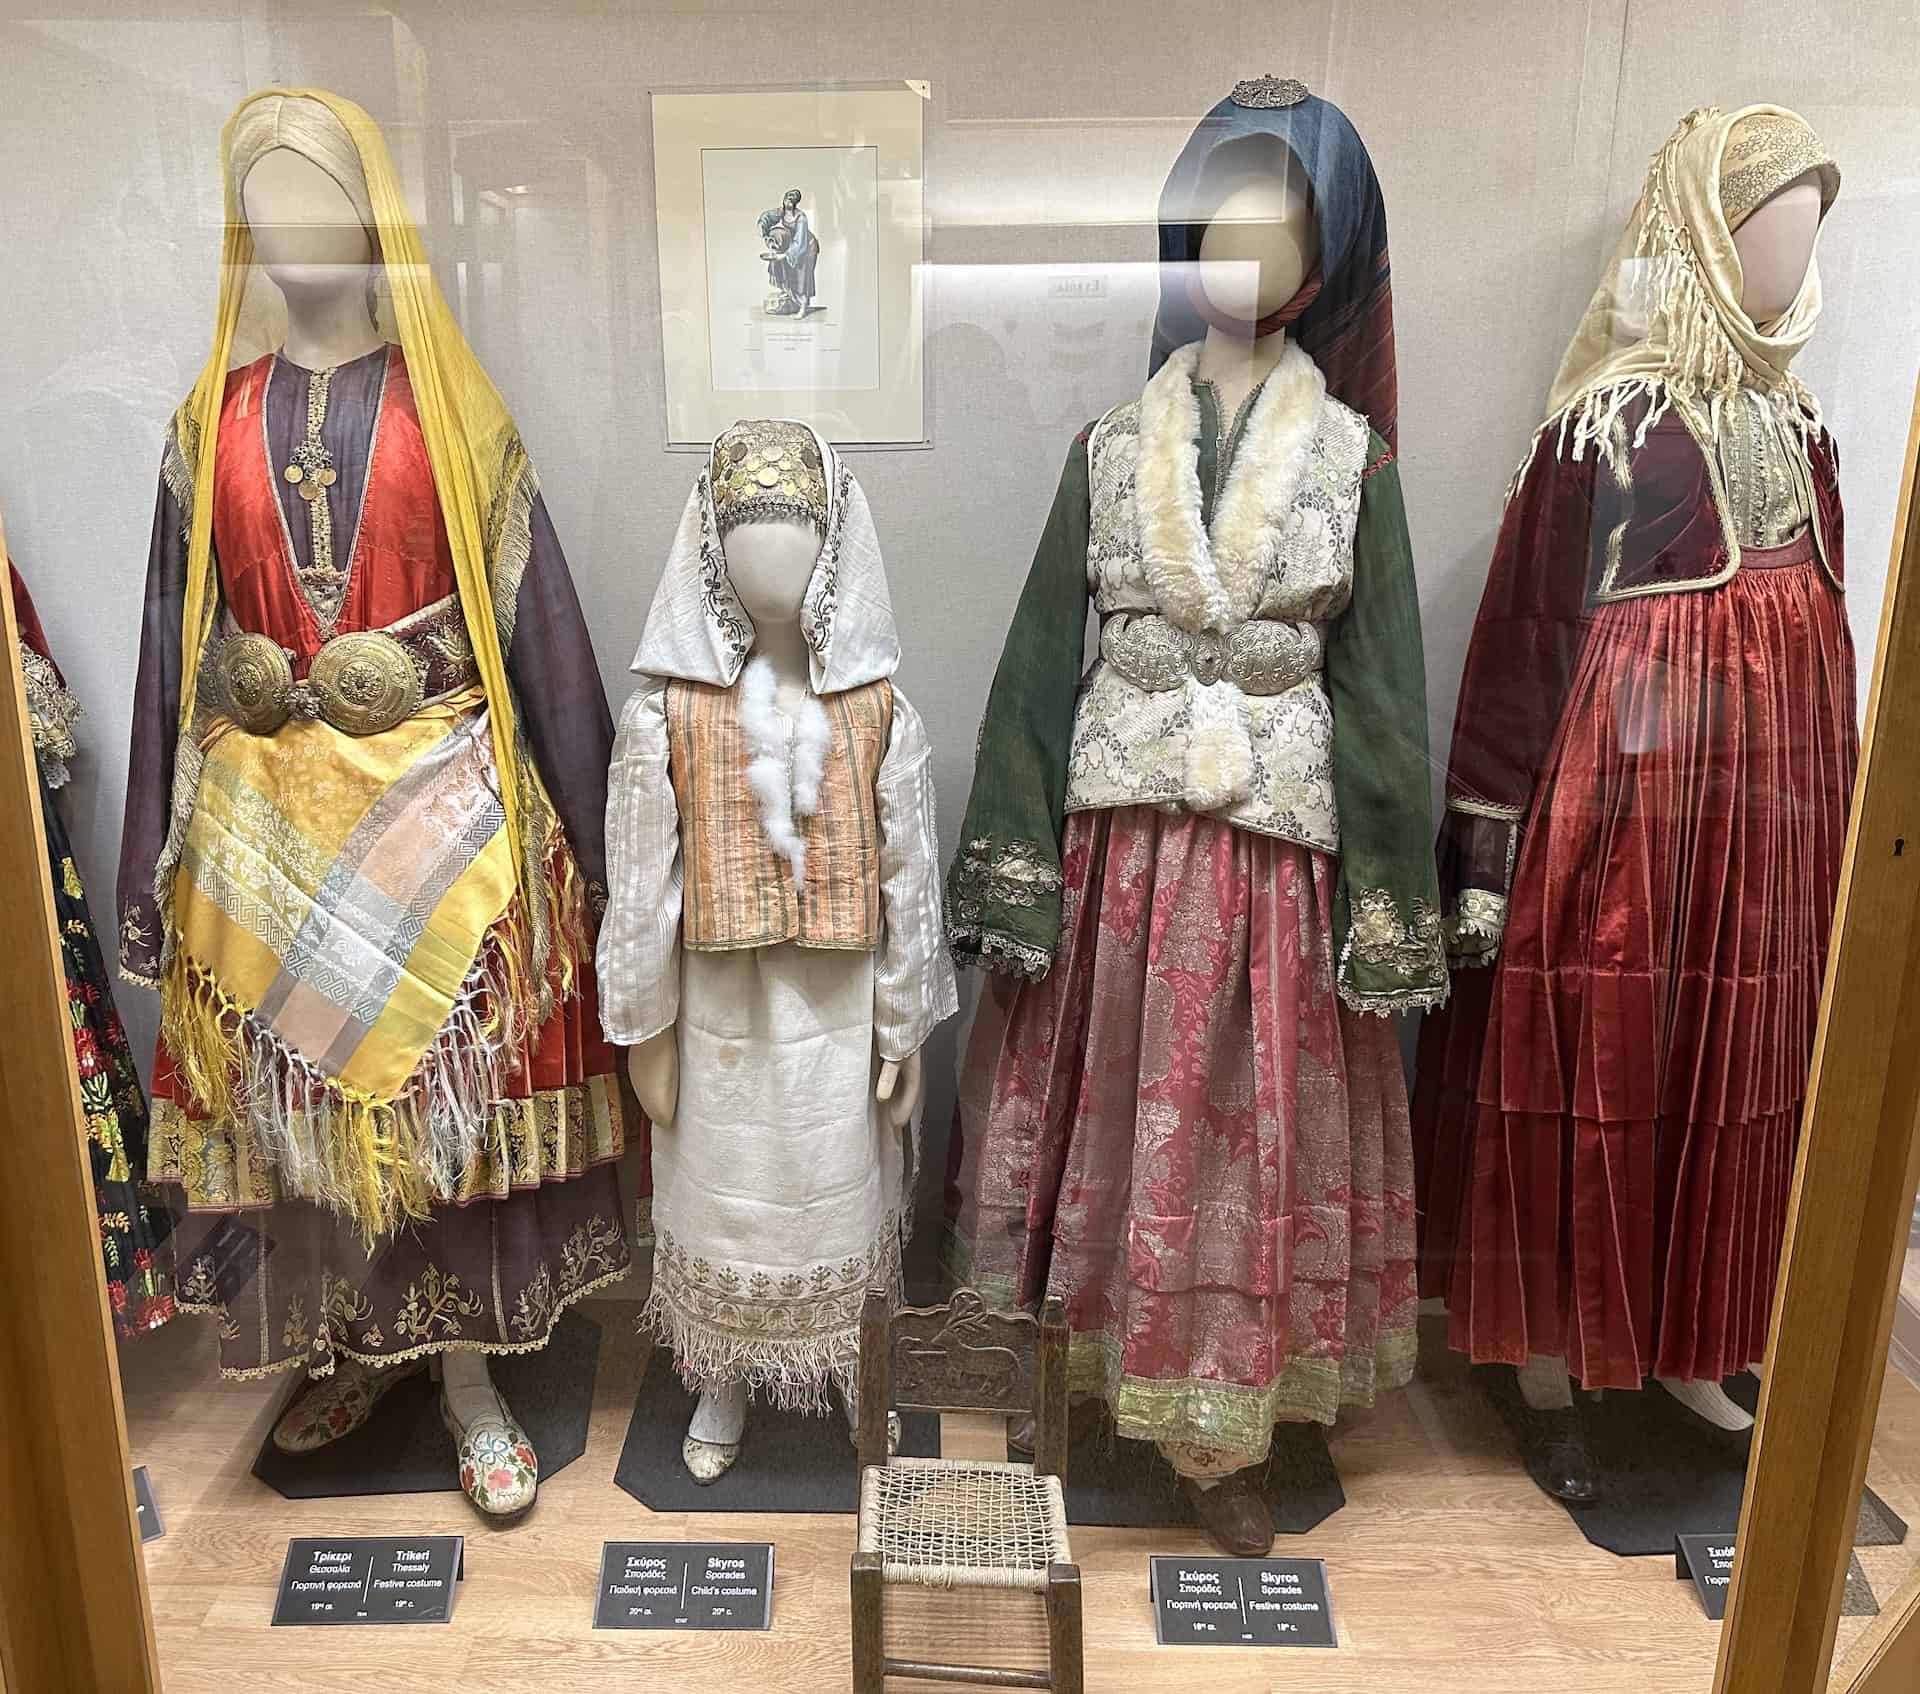 Festive costume from Trikeri, Thessaly, 19th century (left); child's costume from Skyros, Sporades, 20th century (center); festive costume from Skyros, Sporades, 18th century (right)